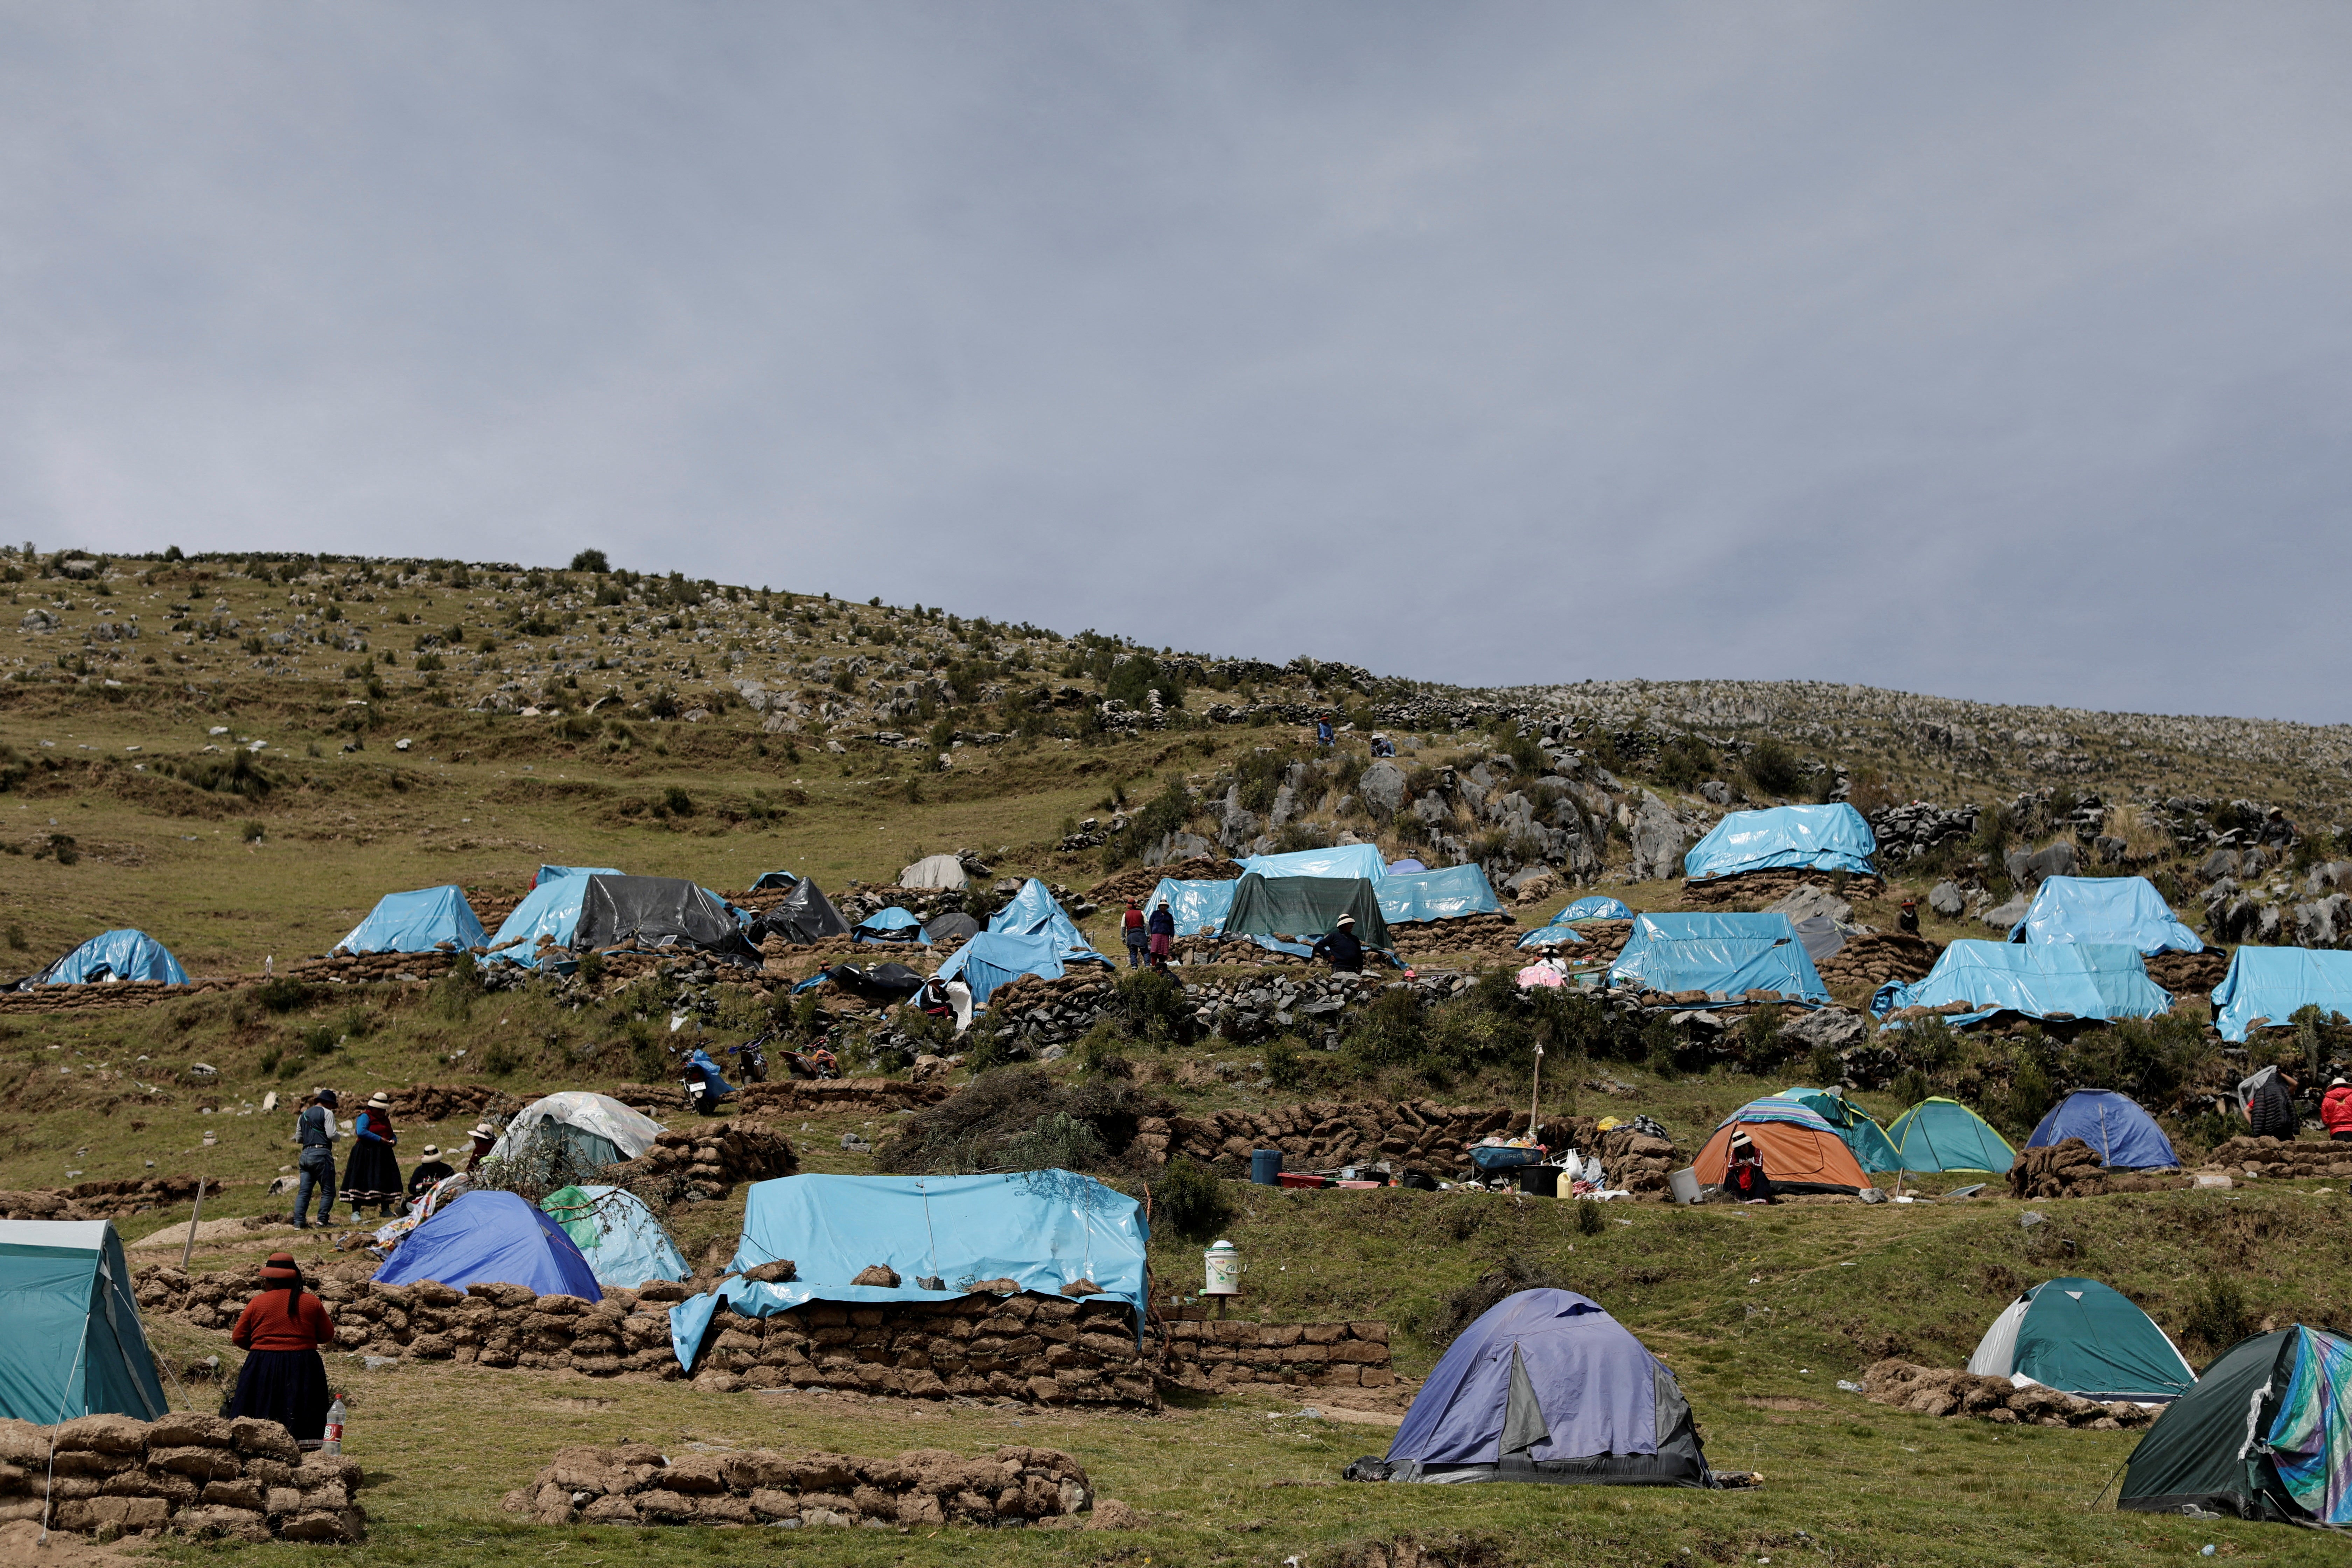 Members of the Apurimac community have been occupying the Las Bambas mine for 47 days